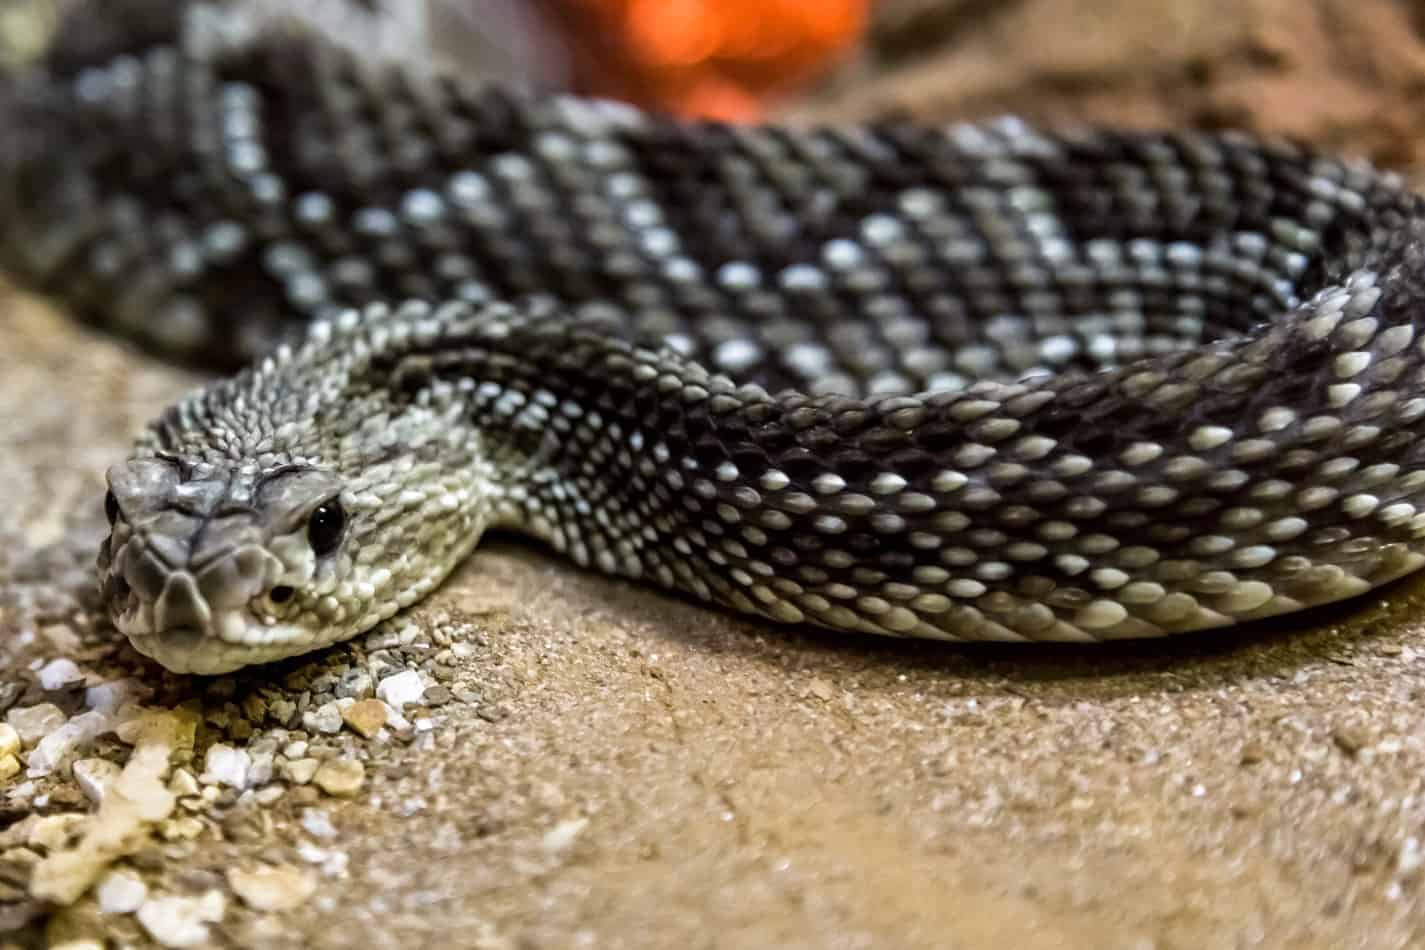 most venomous snake in the US 4 The Most Venomous Snake in the U.S. (With Bite Facts and Pictures)